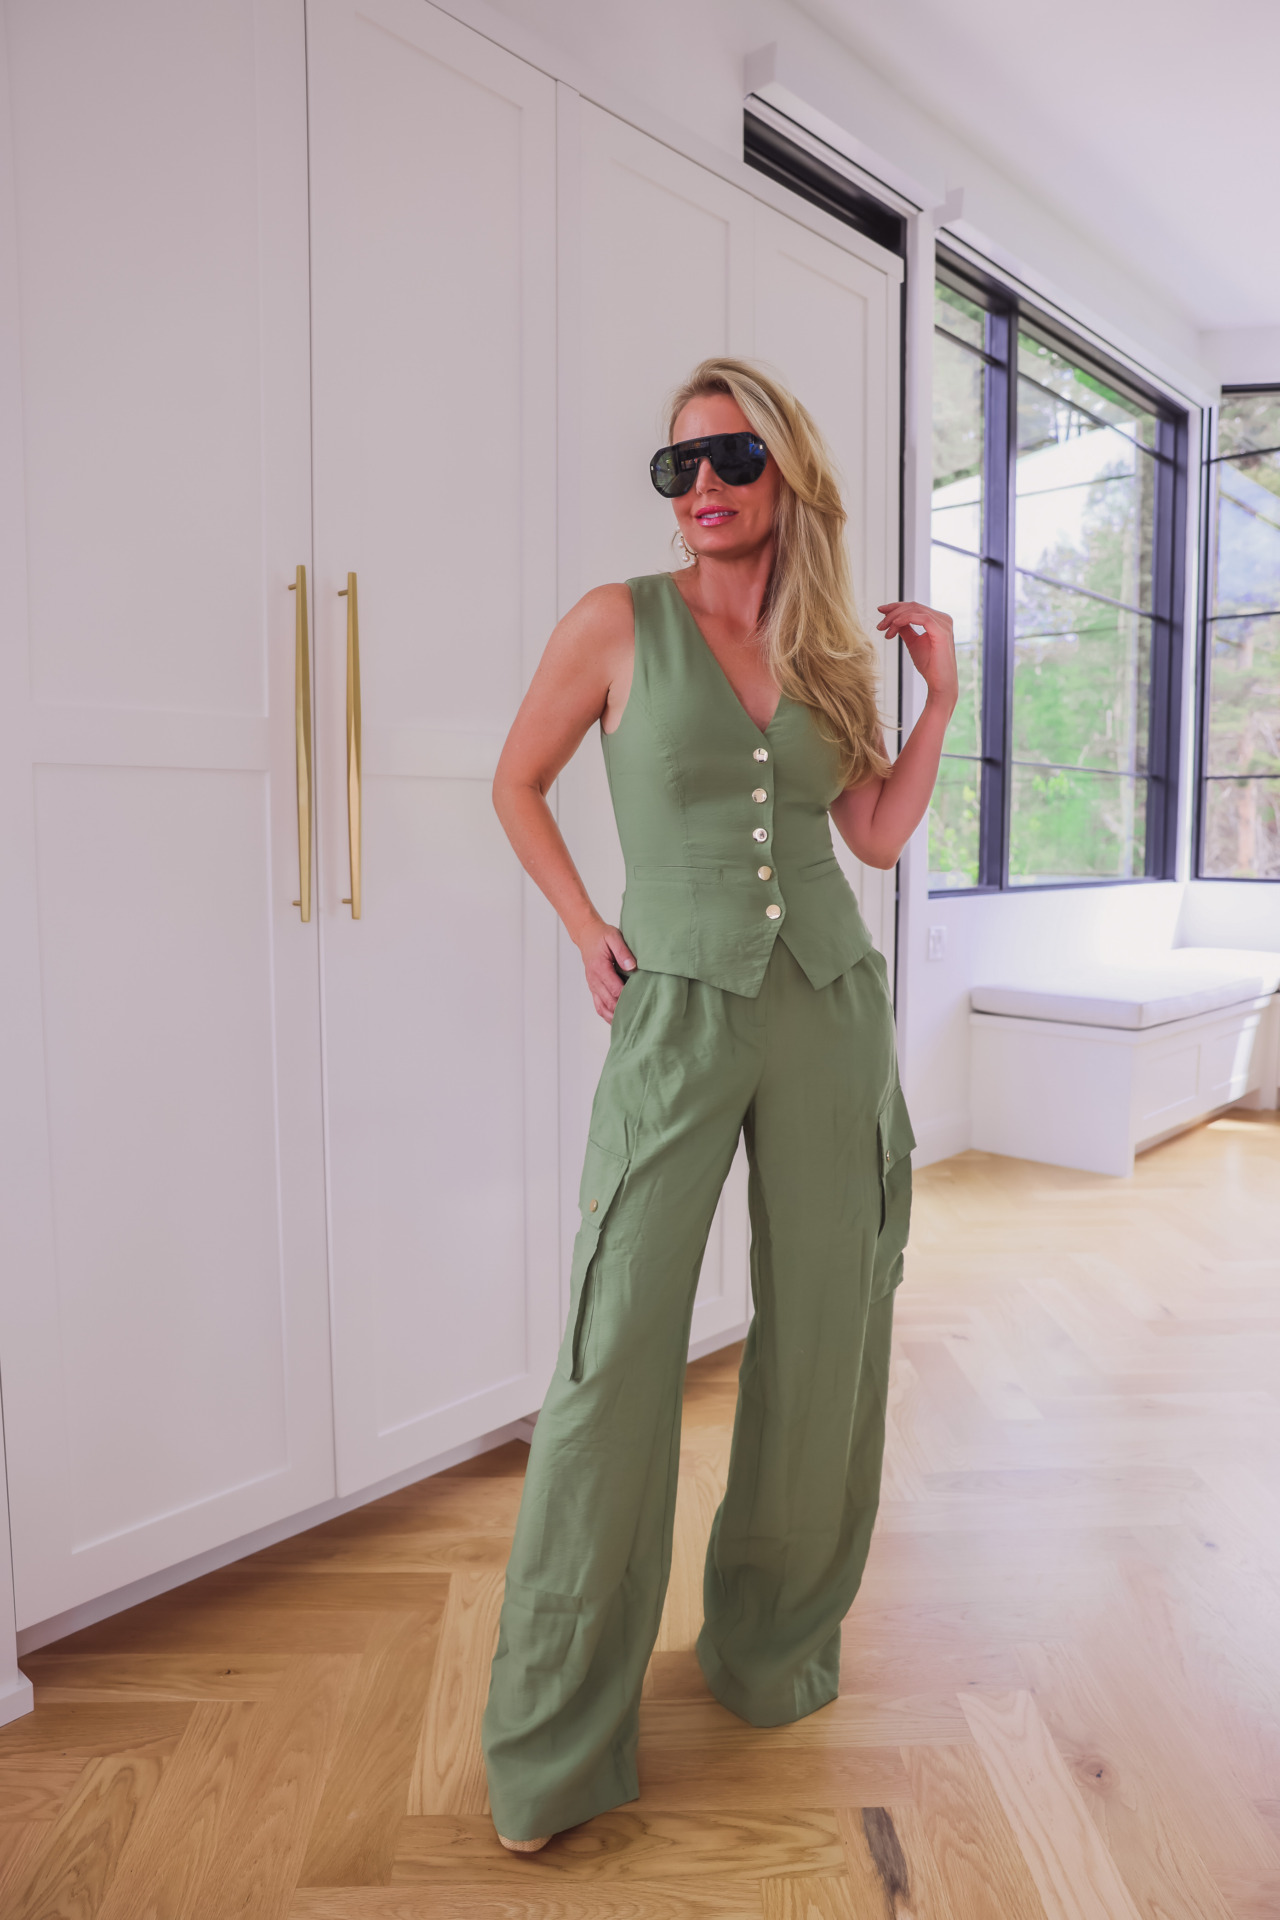 Mom outfits for every occasion-summer mom outfits, chic mom outfits, comfortable mom outfits for summer, erin Busbee, Busbee style, fashion over 40, Ramy Brook Cosette V-neck vest, Ramy Brook Emil Wide Leg Cargo Pants